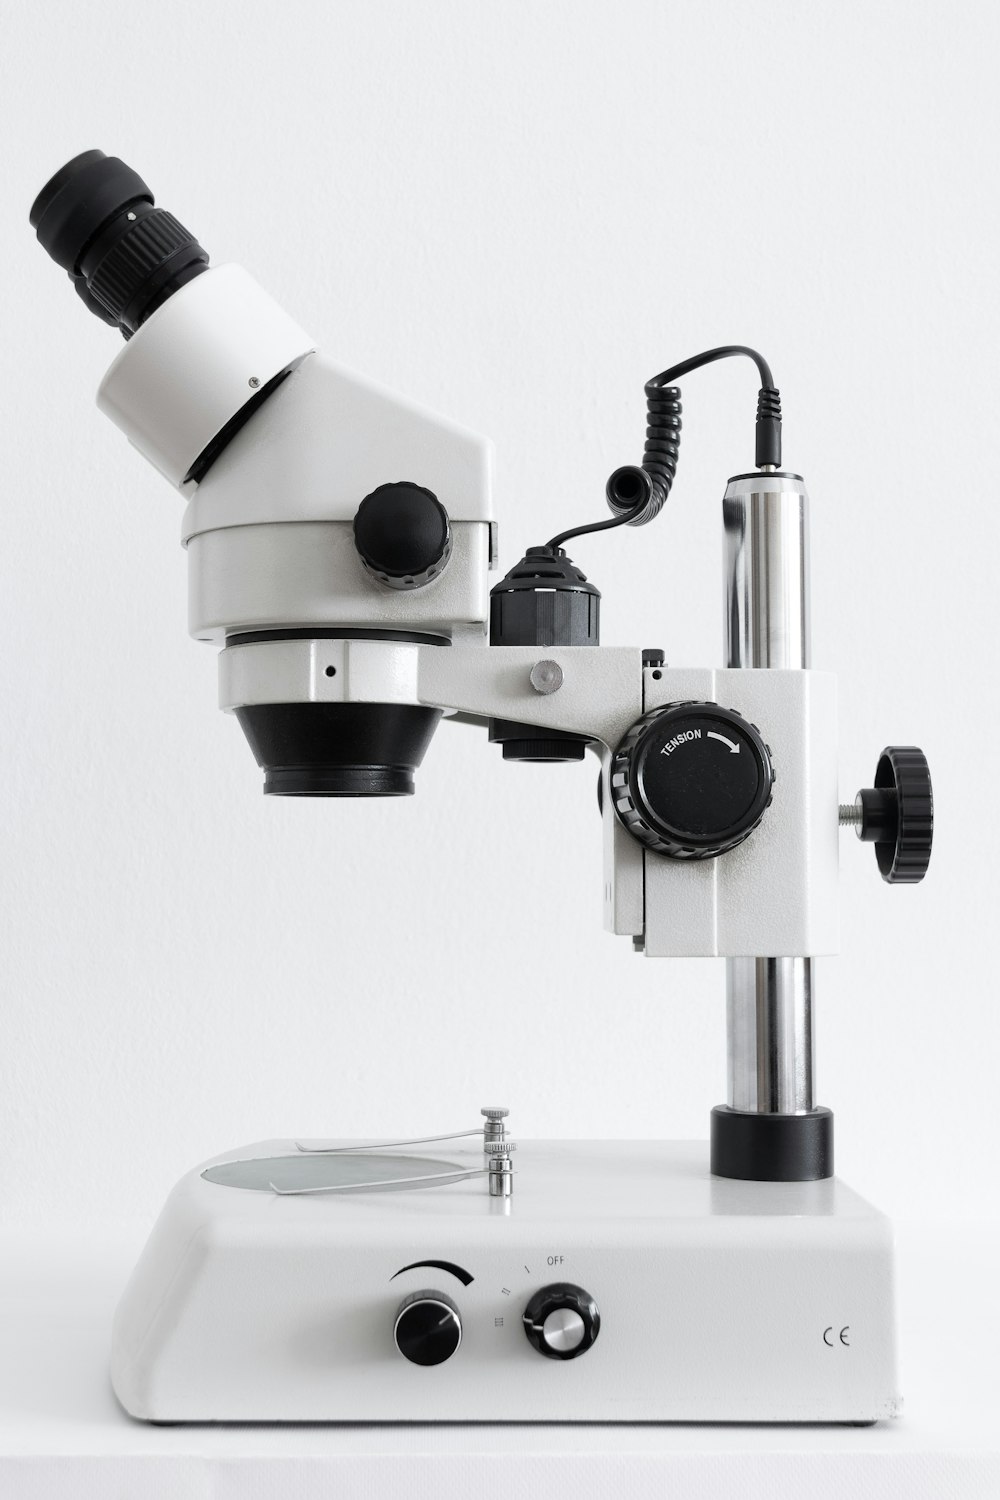 750+ Microscope Pictures [HD] | Download Free Images on Unsplash